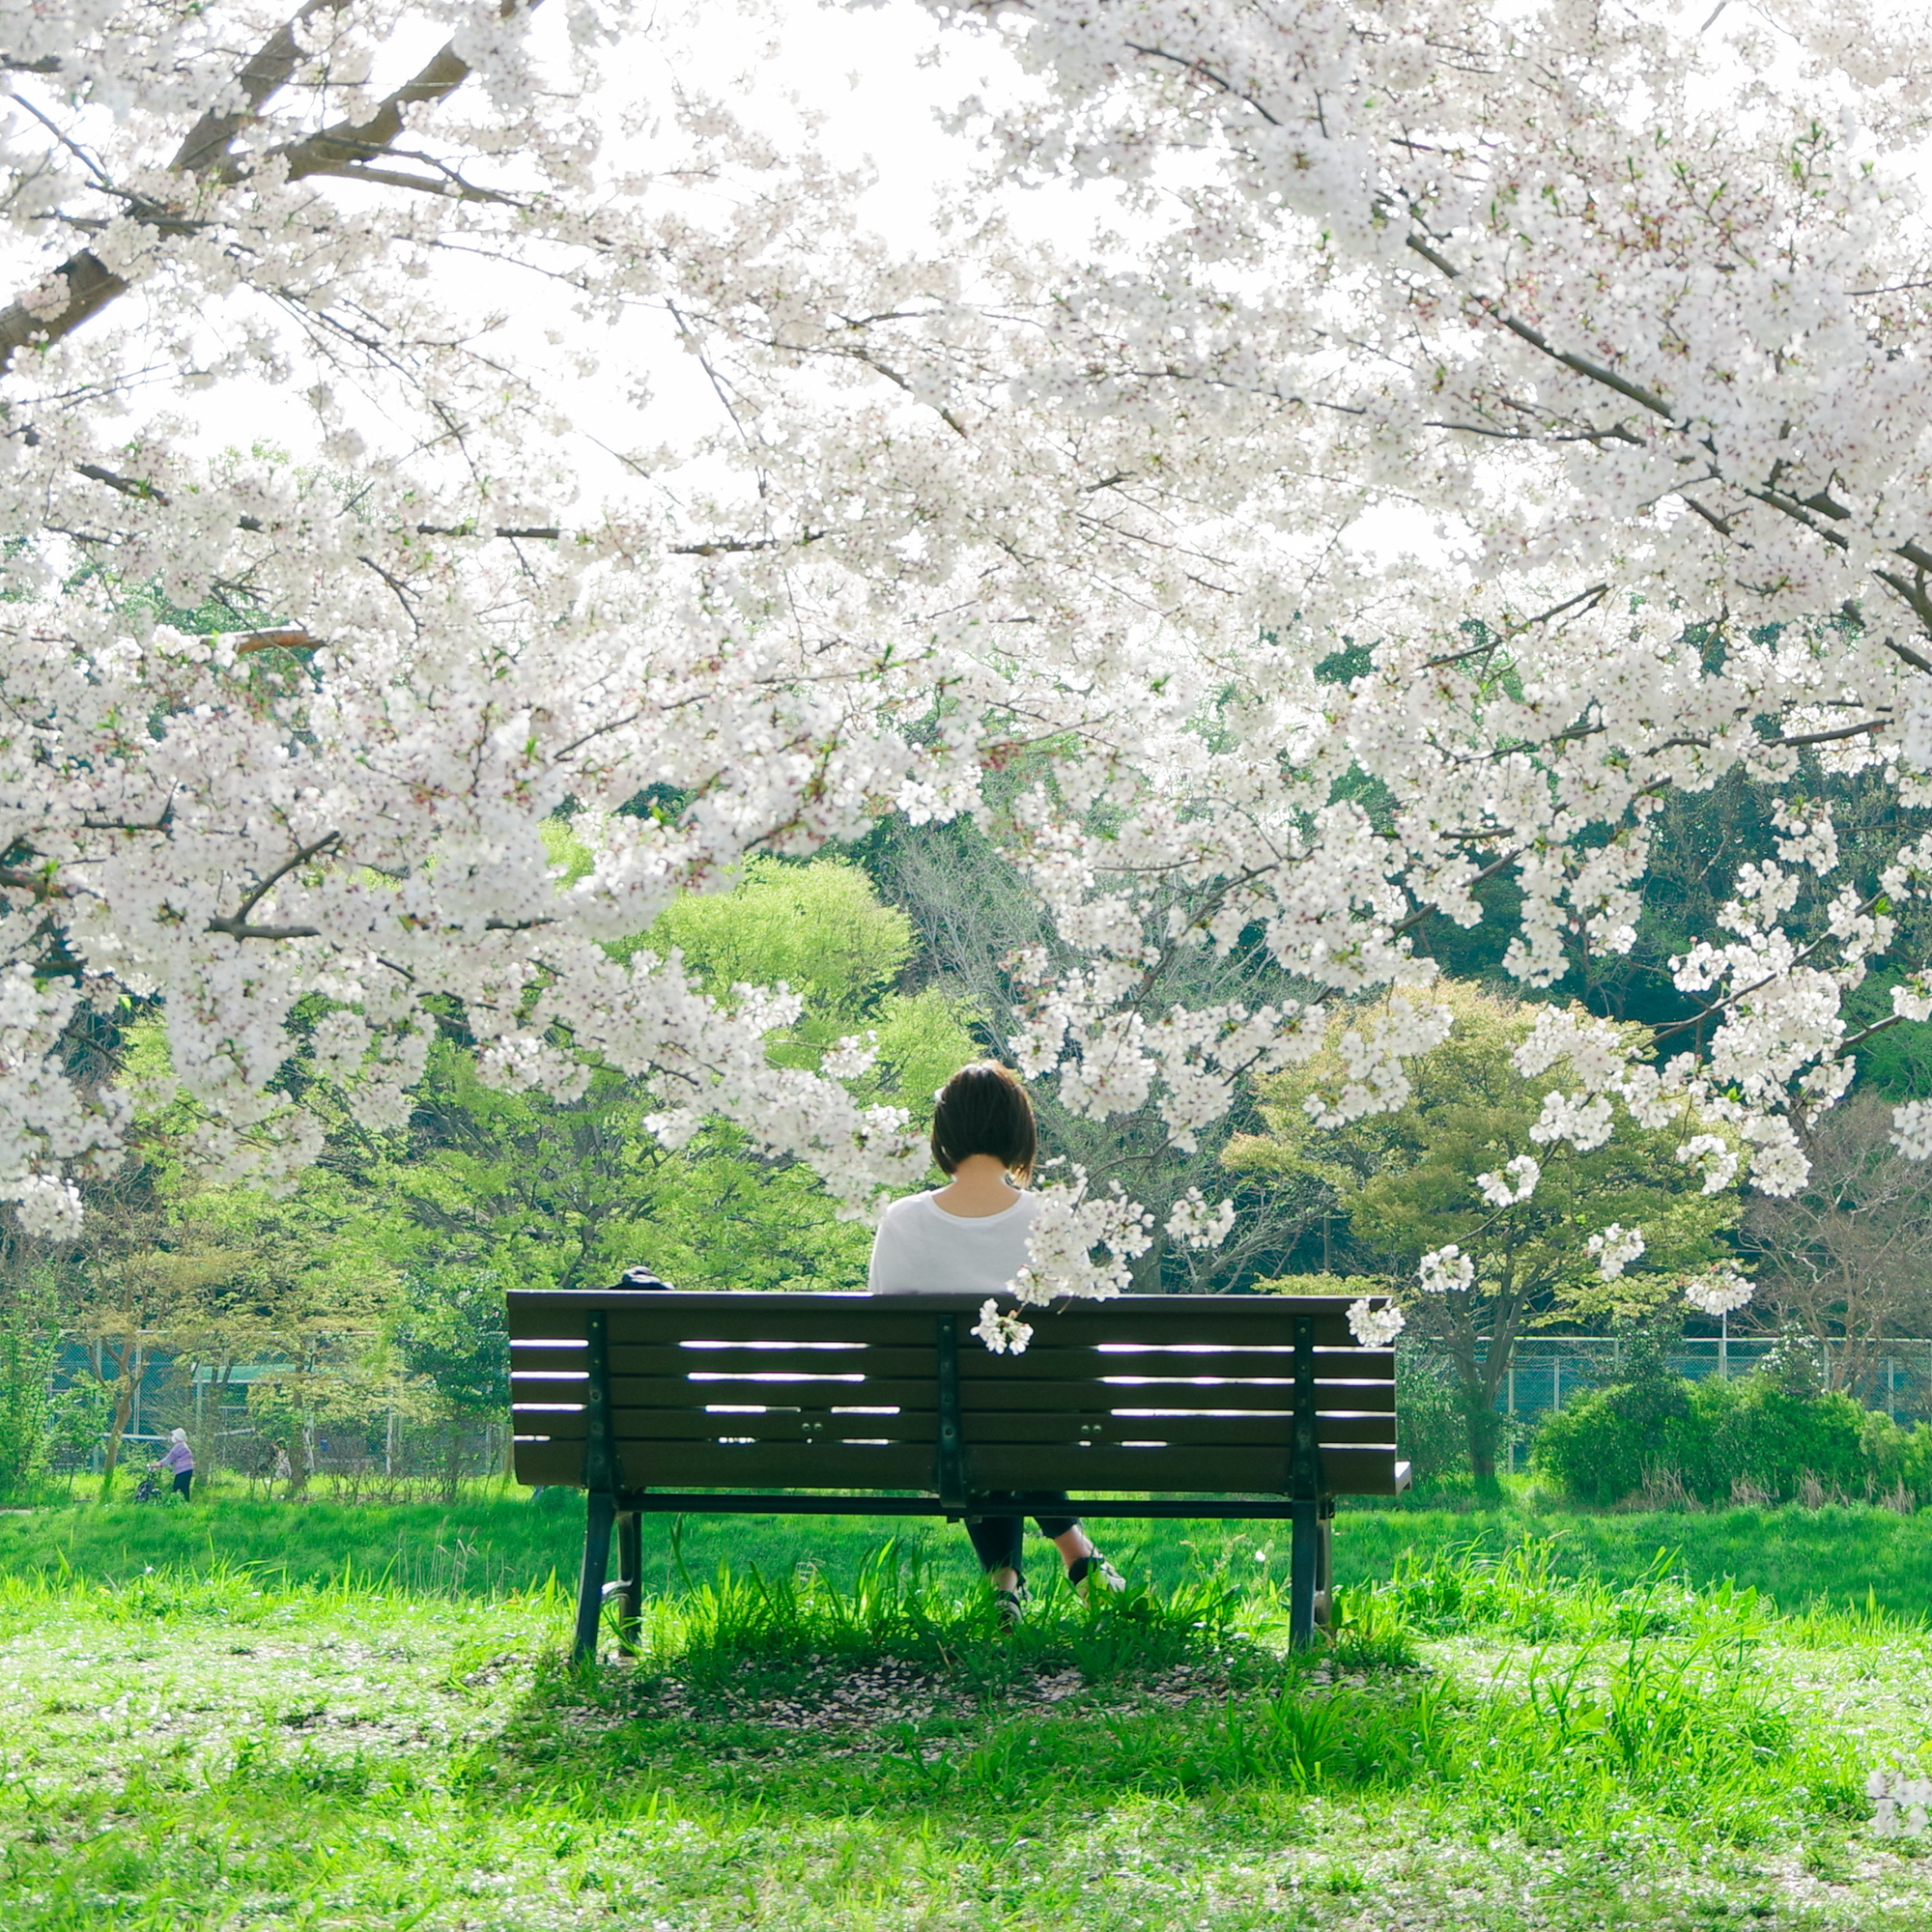 A photo of a woman sitting on a bench under Cherry Blossom trees.